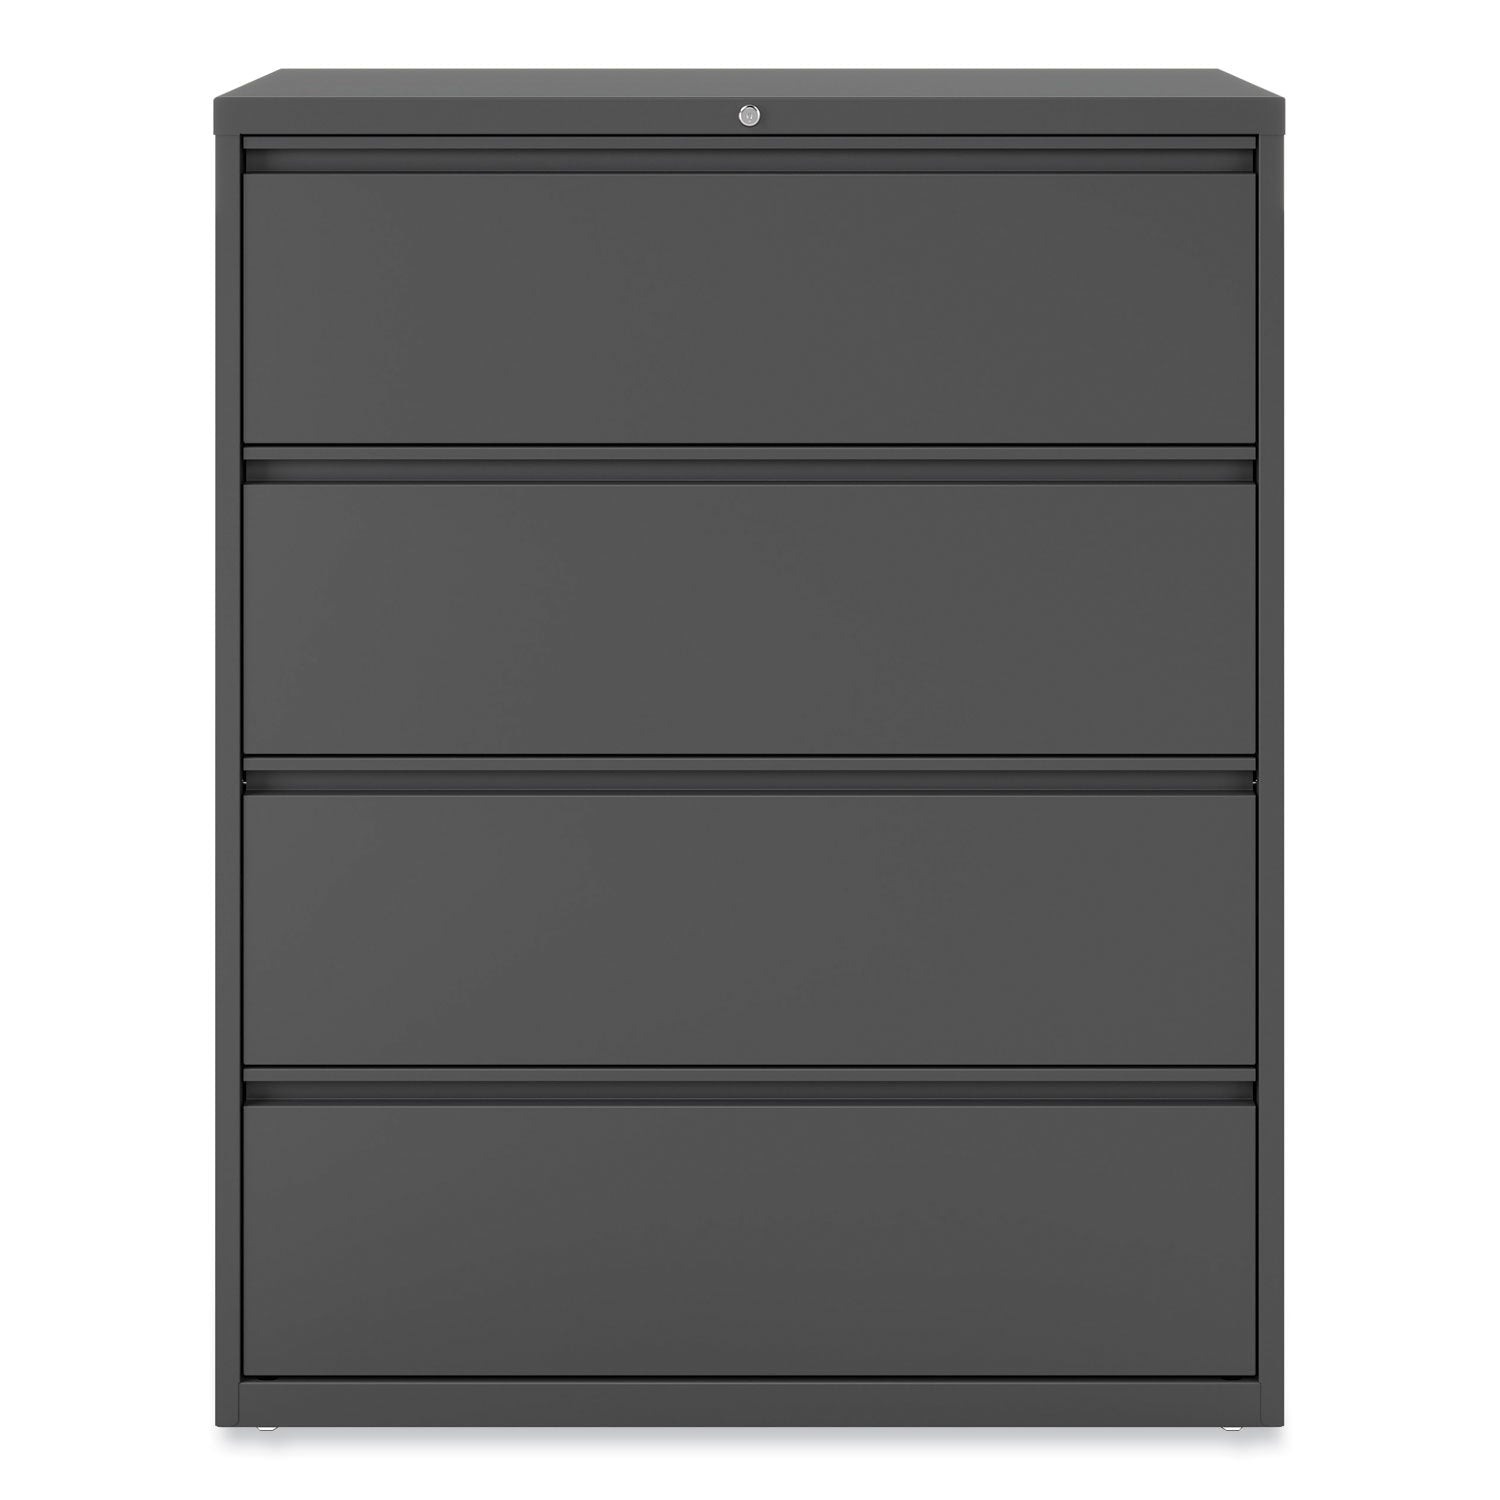 lateral-file-4-legal-letter-a4-a5-size-file-drawers-charcoal-42-x-1863-x-525_alehlf4254cc - 8